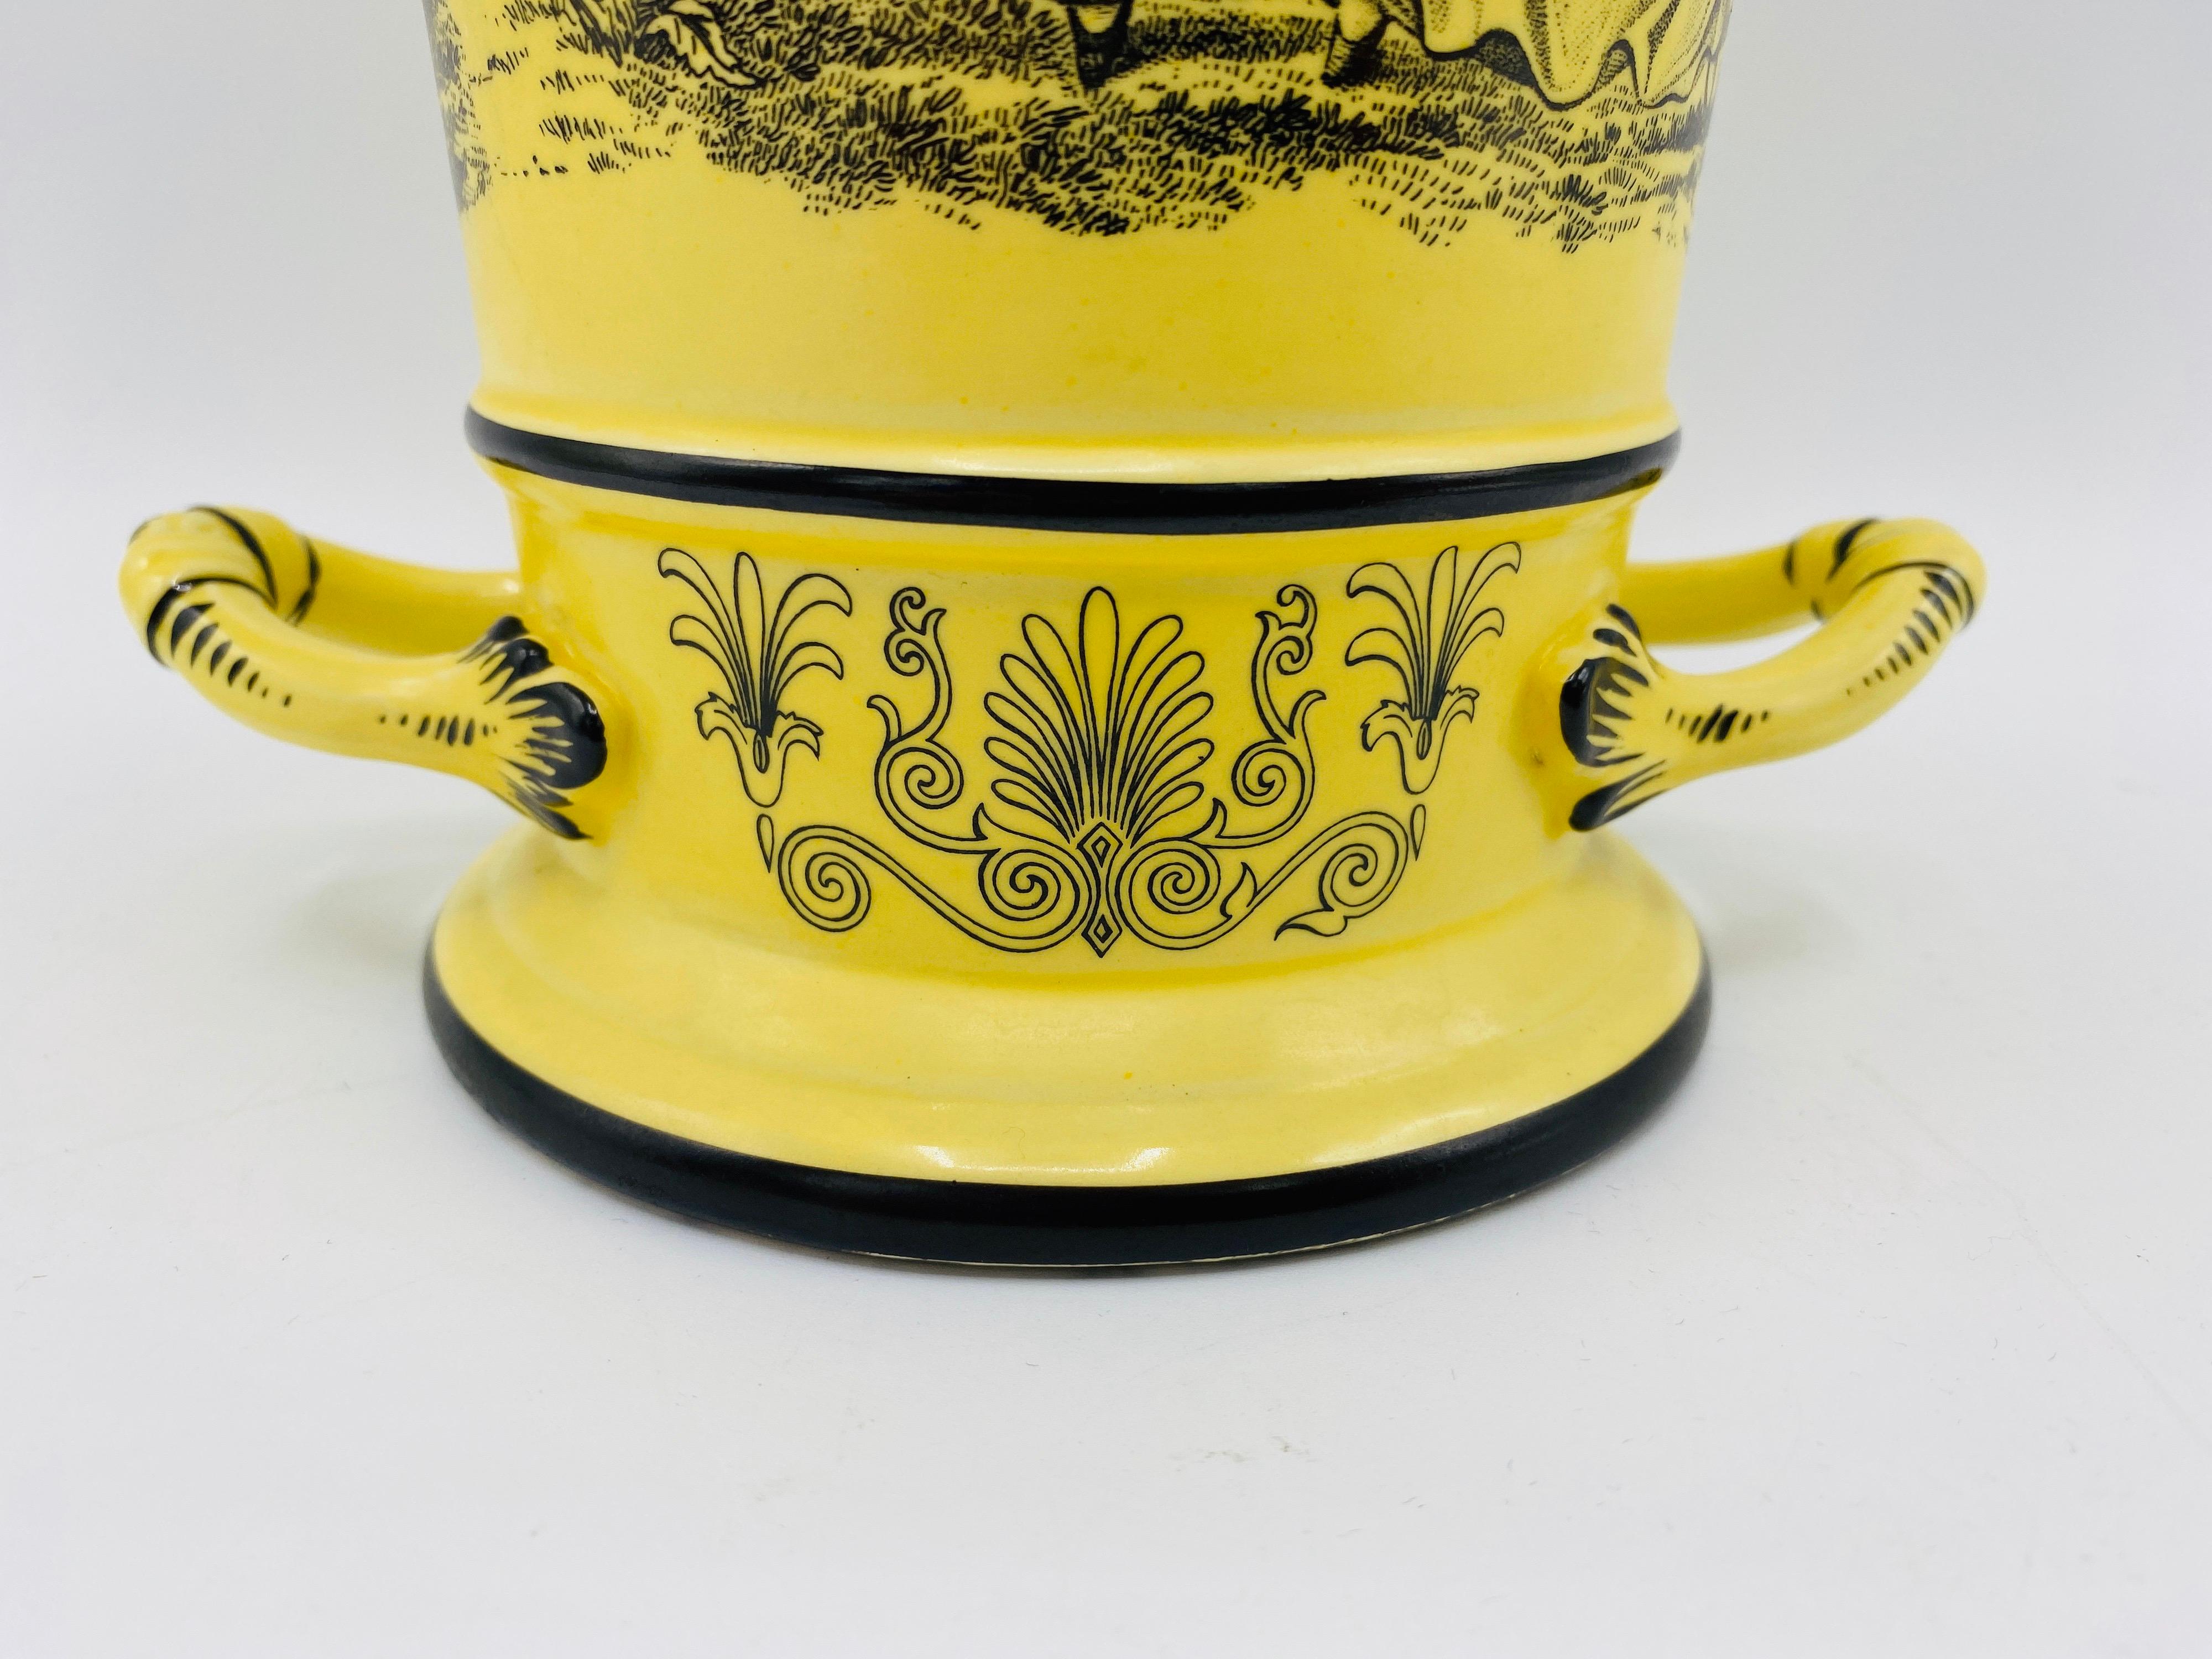 Italian Mottahedeh Yellow and Black Toile Handled Urn Vases, Pair, 1960s For Sale 8